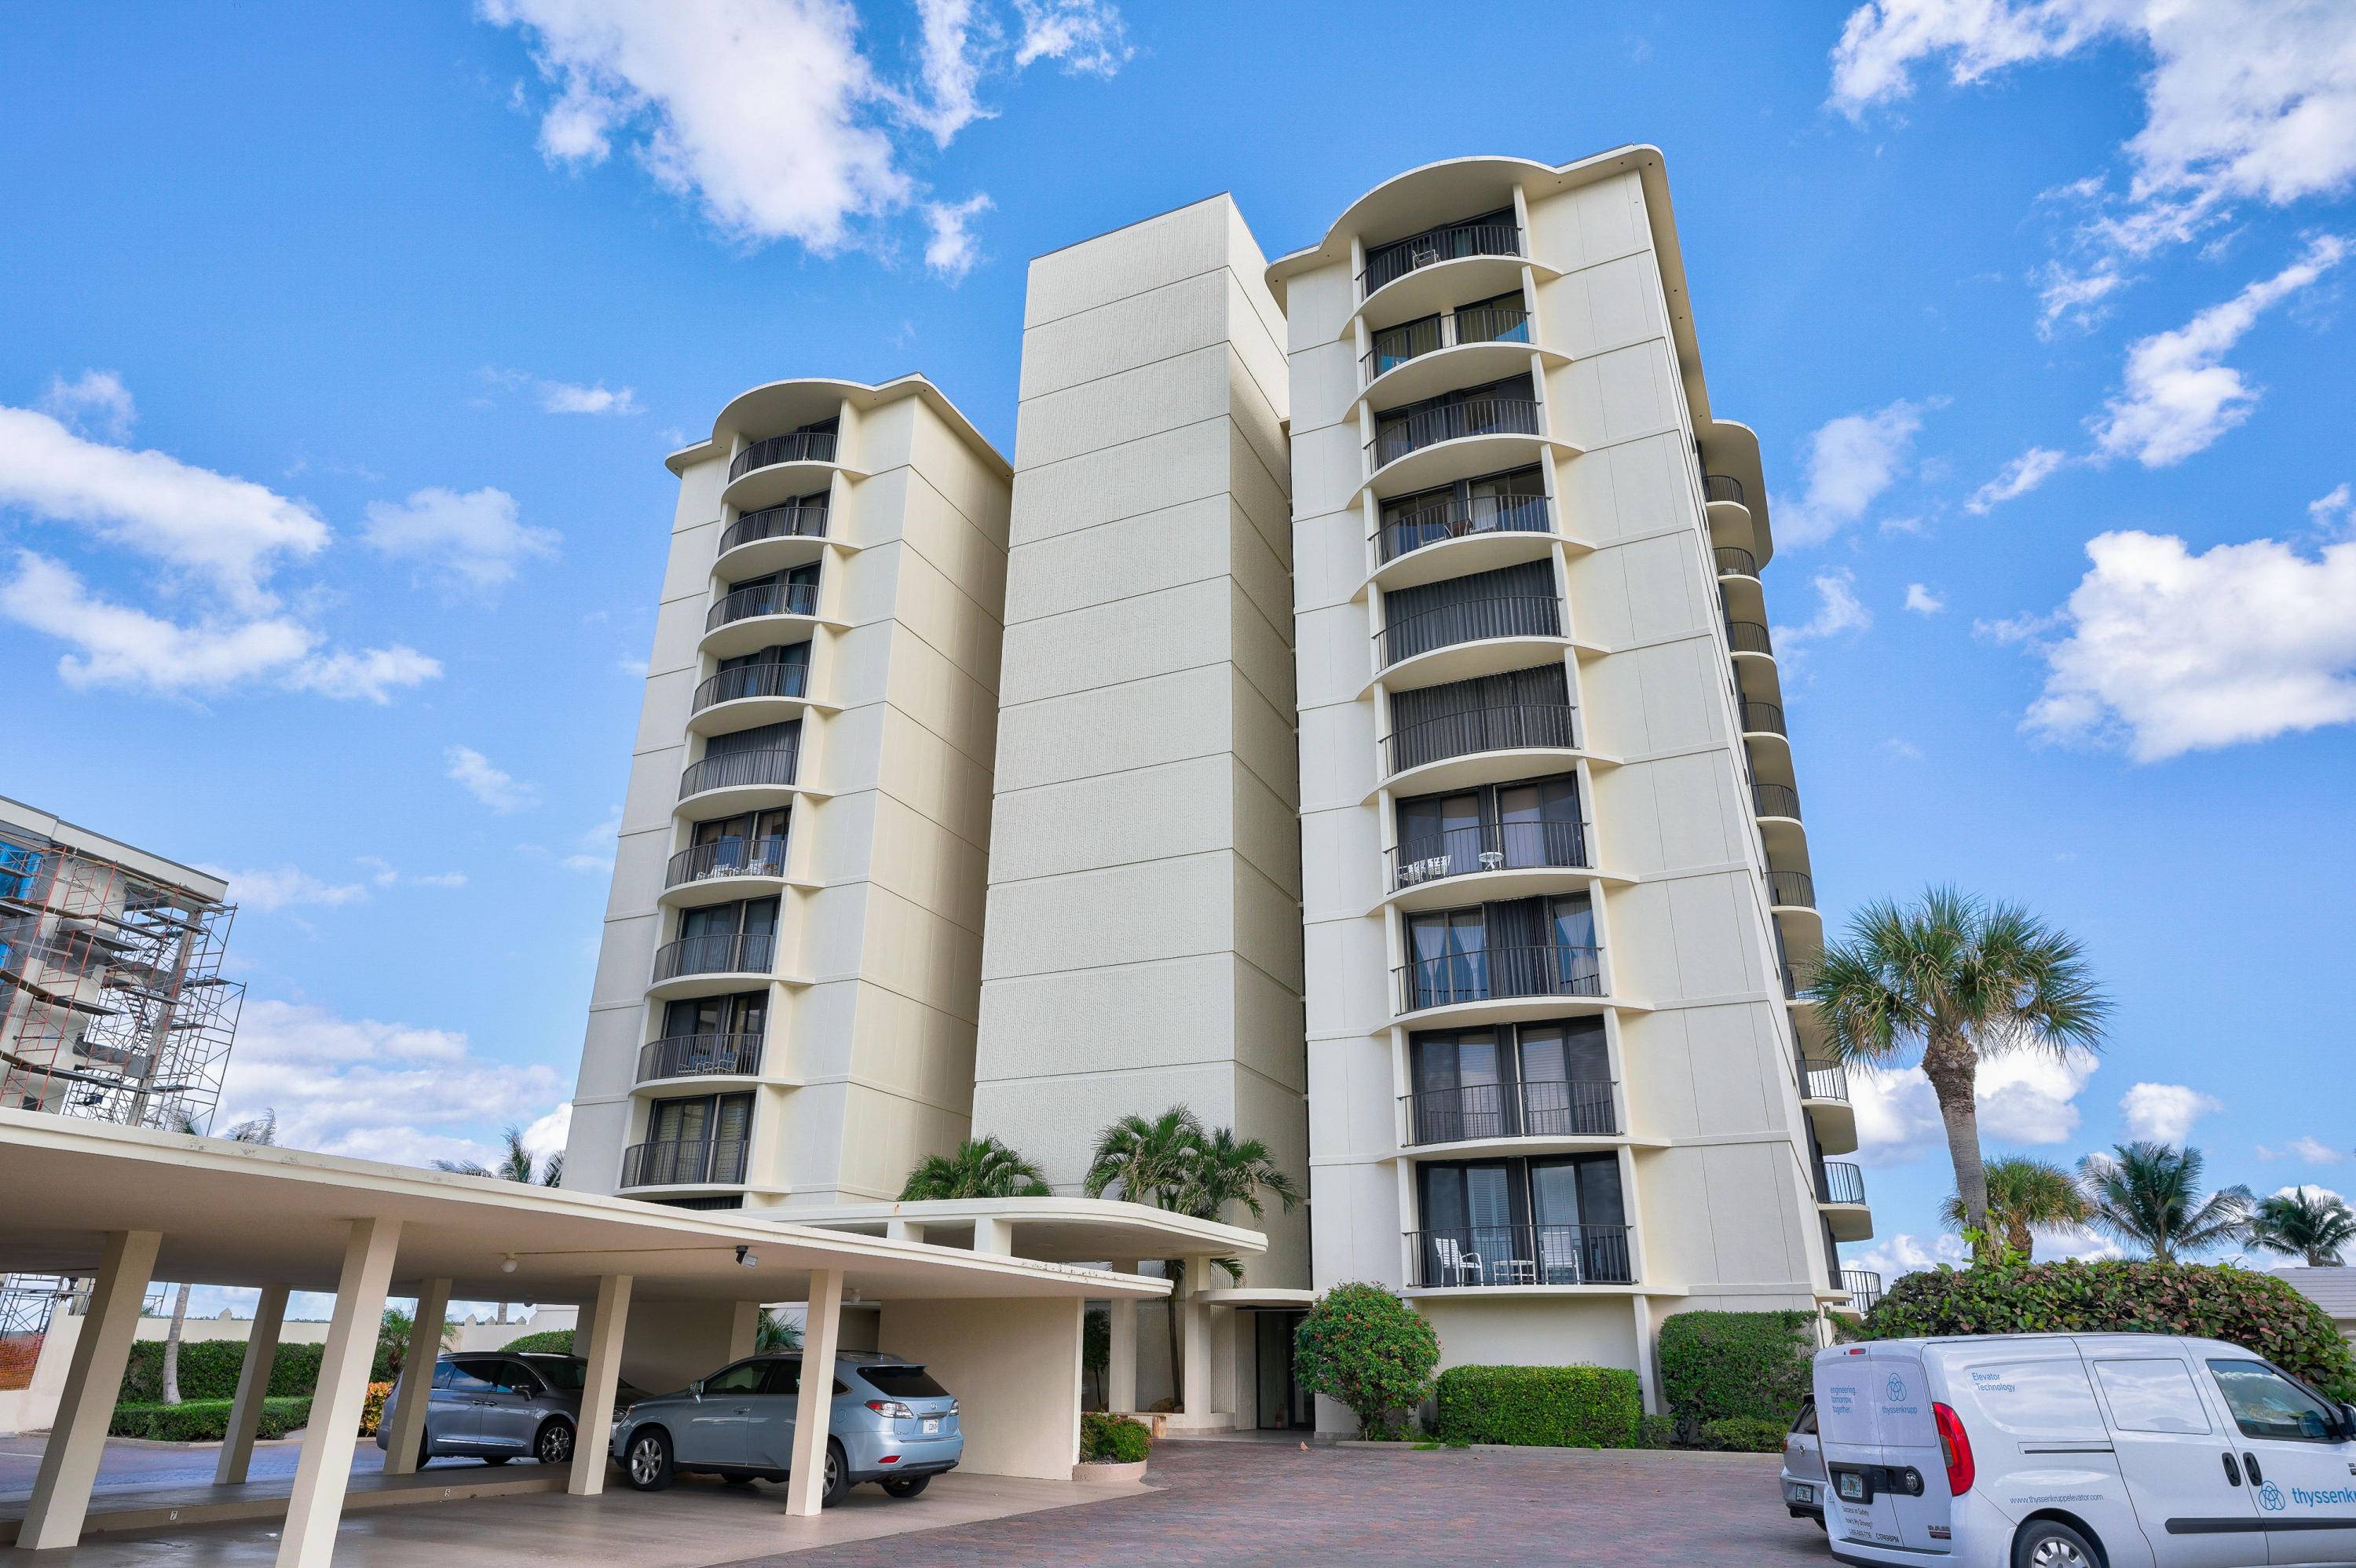 Luxurious light and bright 3BR 2BA oceanfront corner condo with wraparound balcony and unobstructed views of the beach and the ocean from the kitchen, living room, dining area and the ...